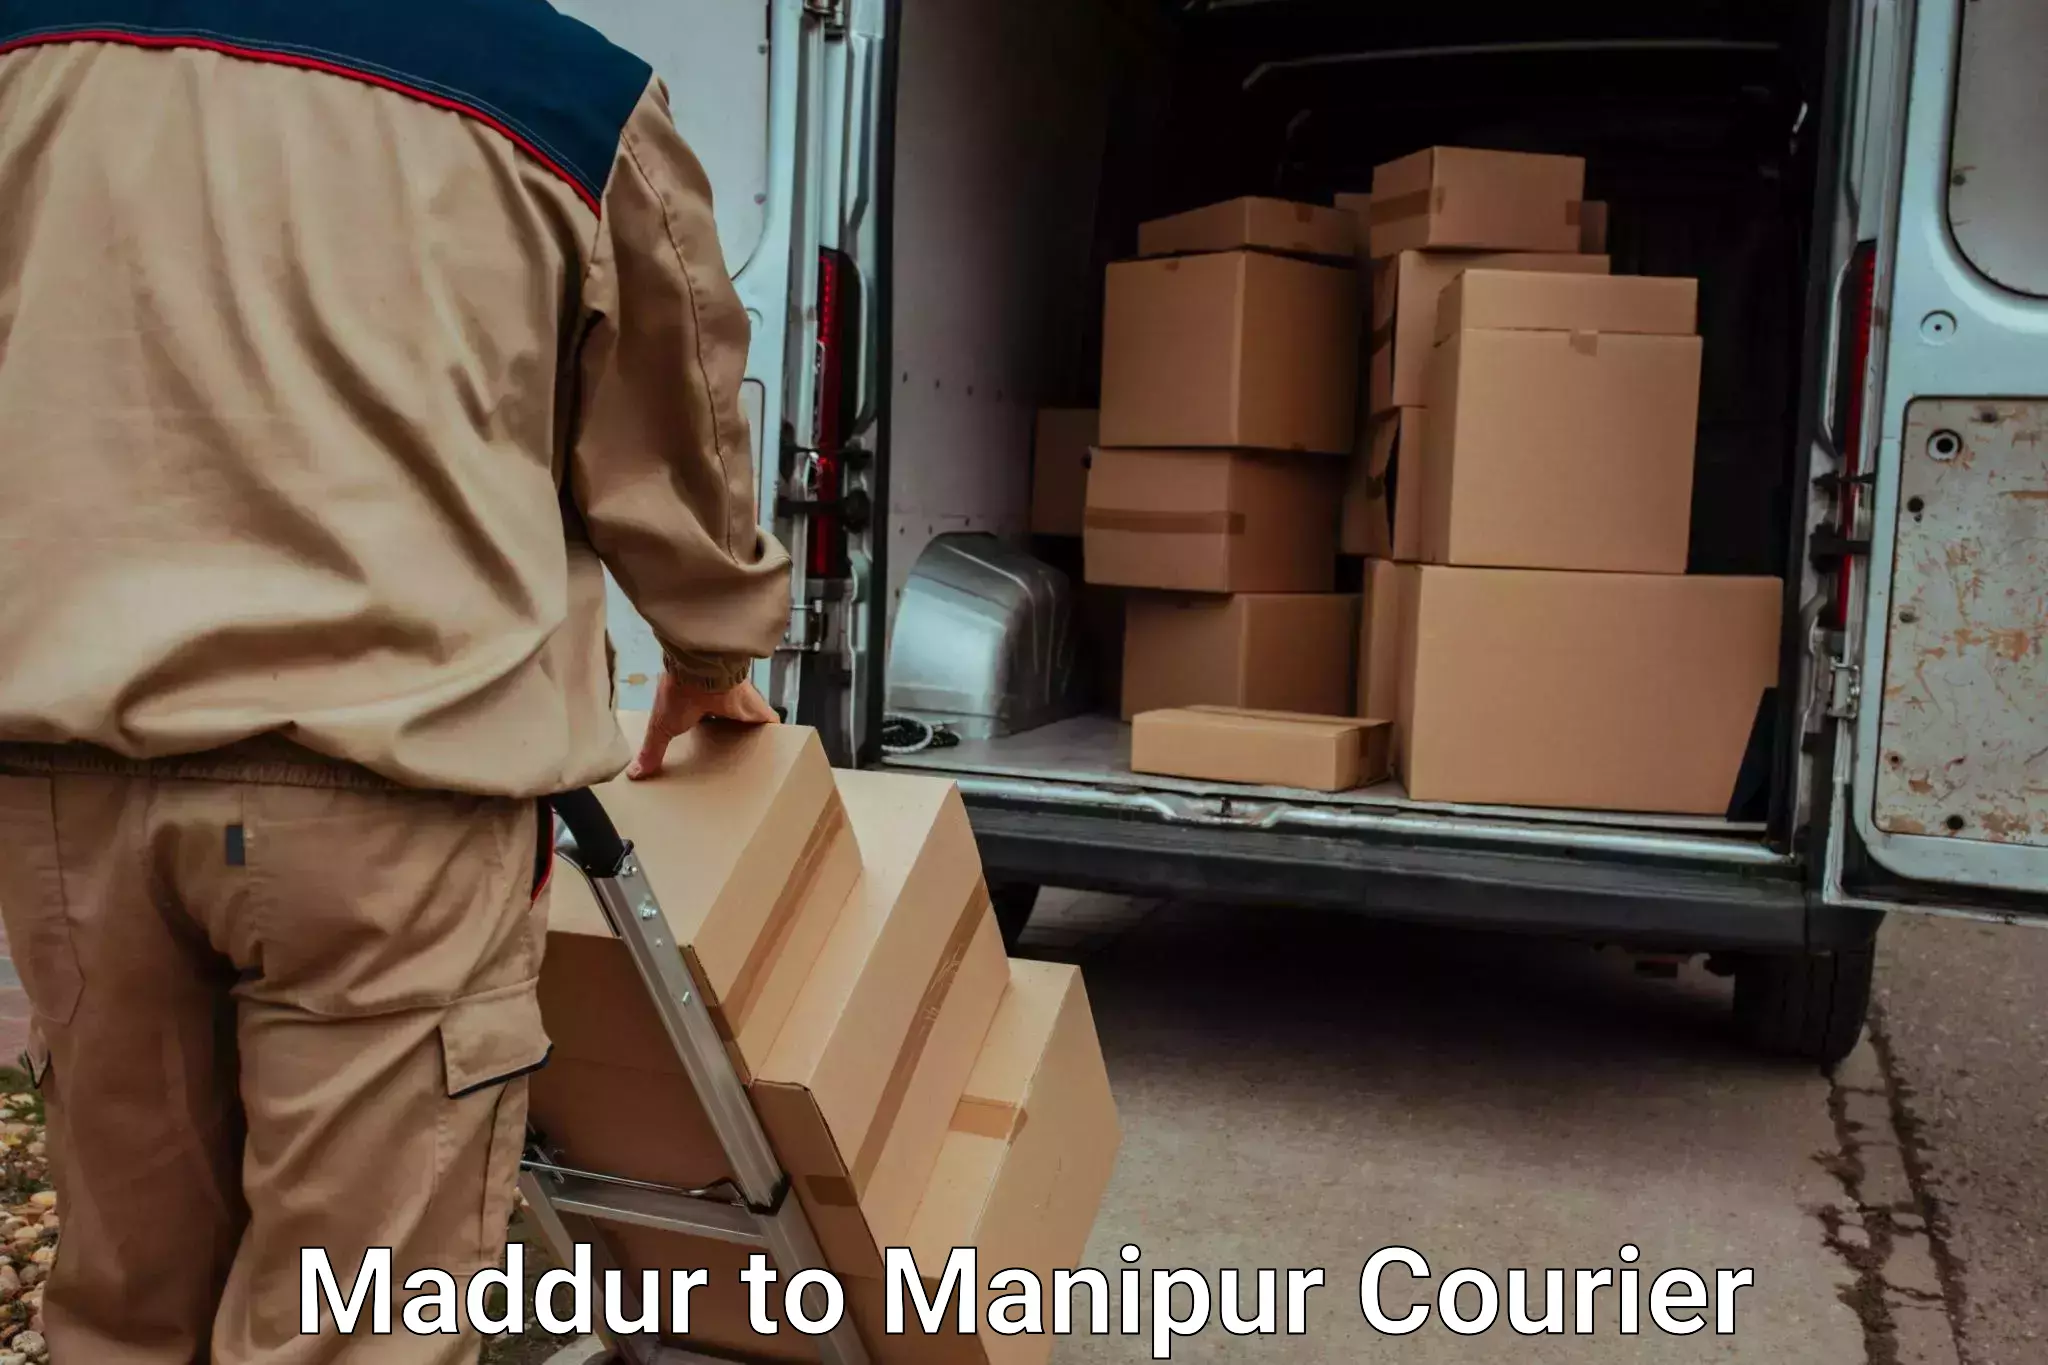 Excess baggage transport Maddur to Manipur